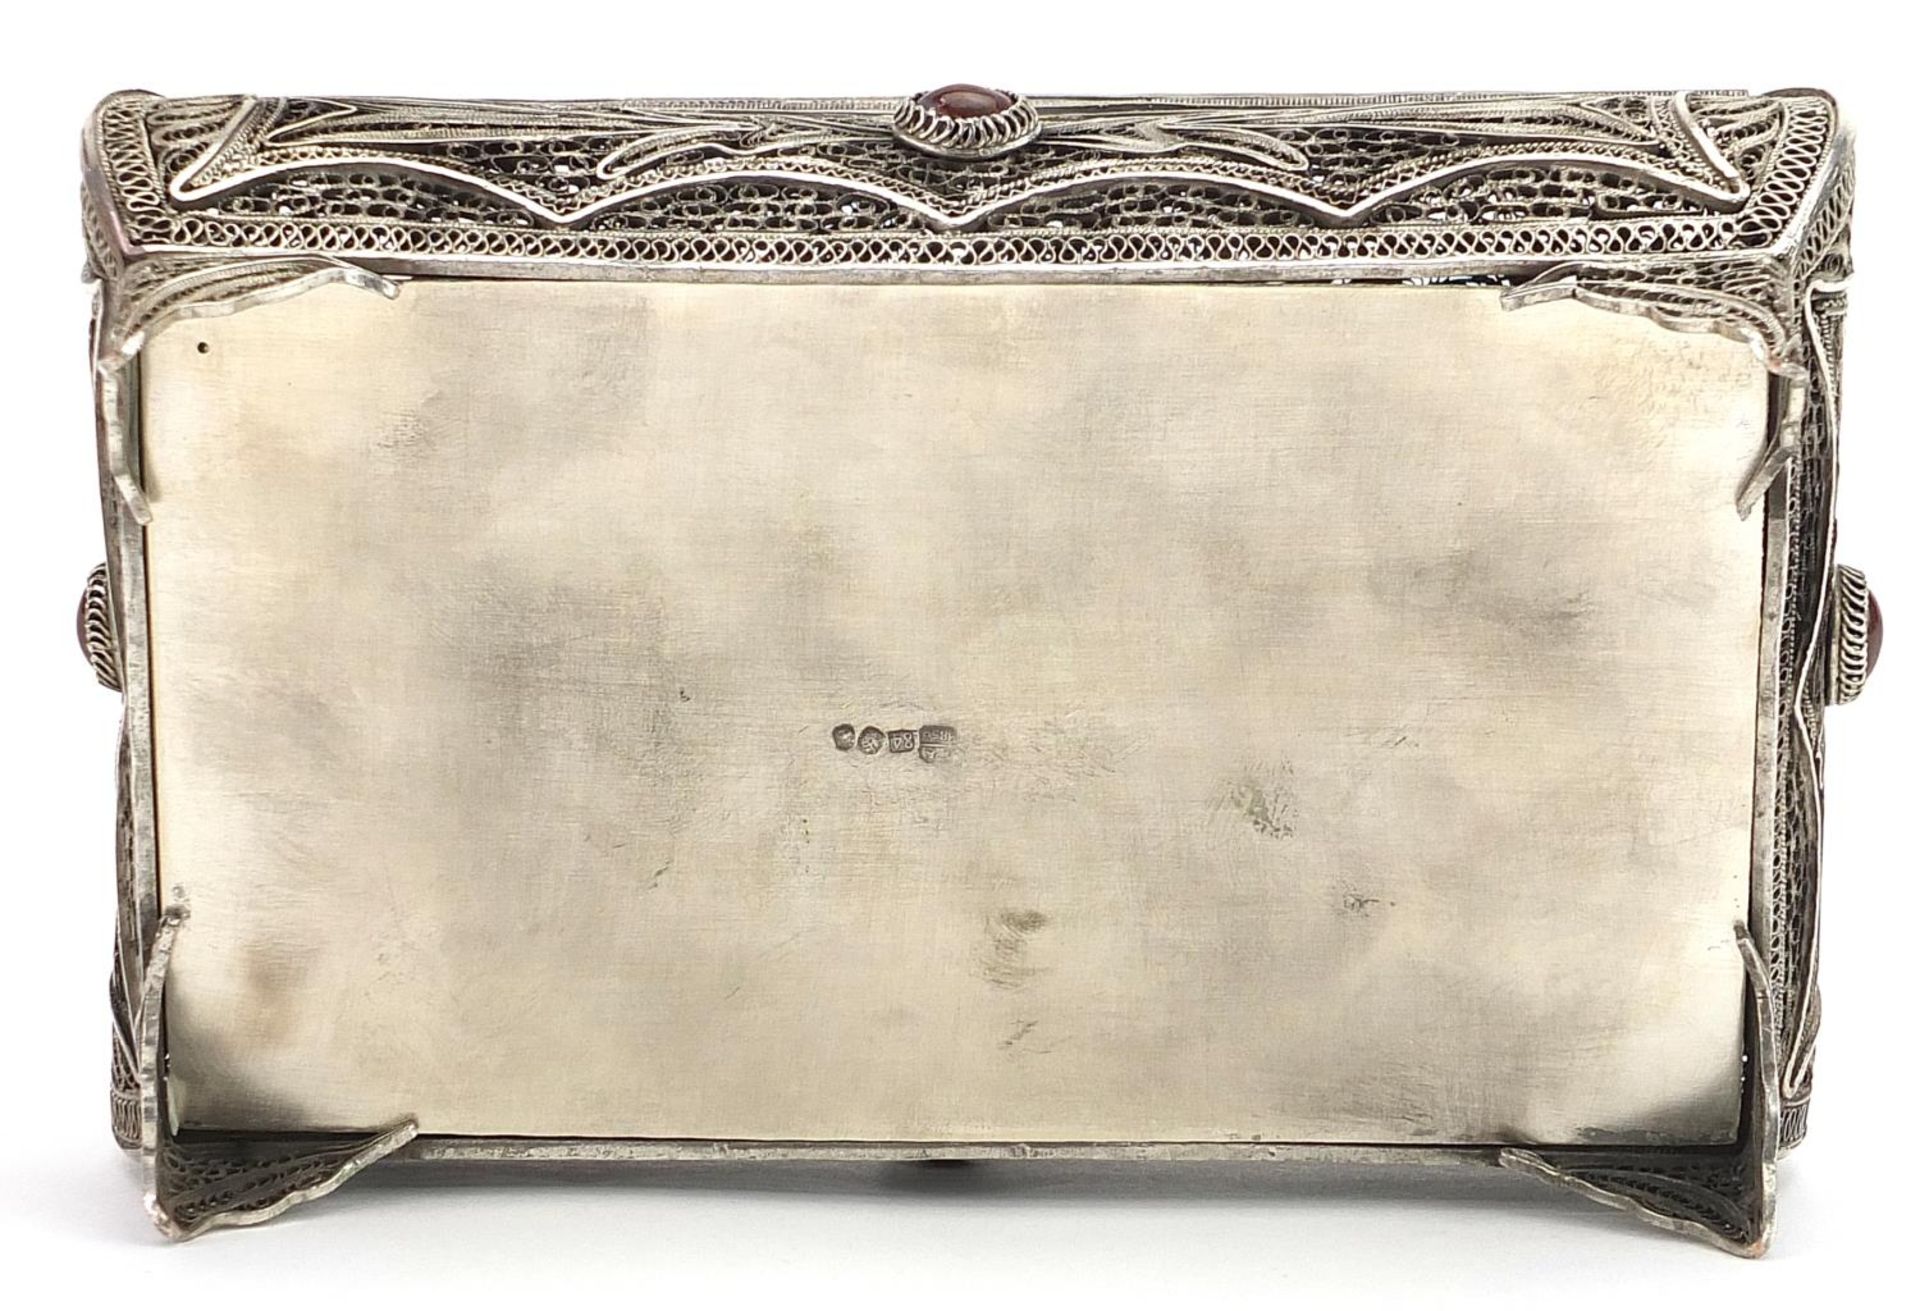 Russian silver filigree casket with hinged lid set with cabochon hardstones, 7cm H x 16cm W x 10.5cm - Image 3 of 4